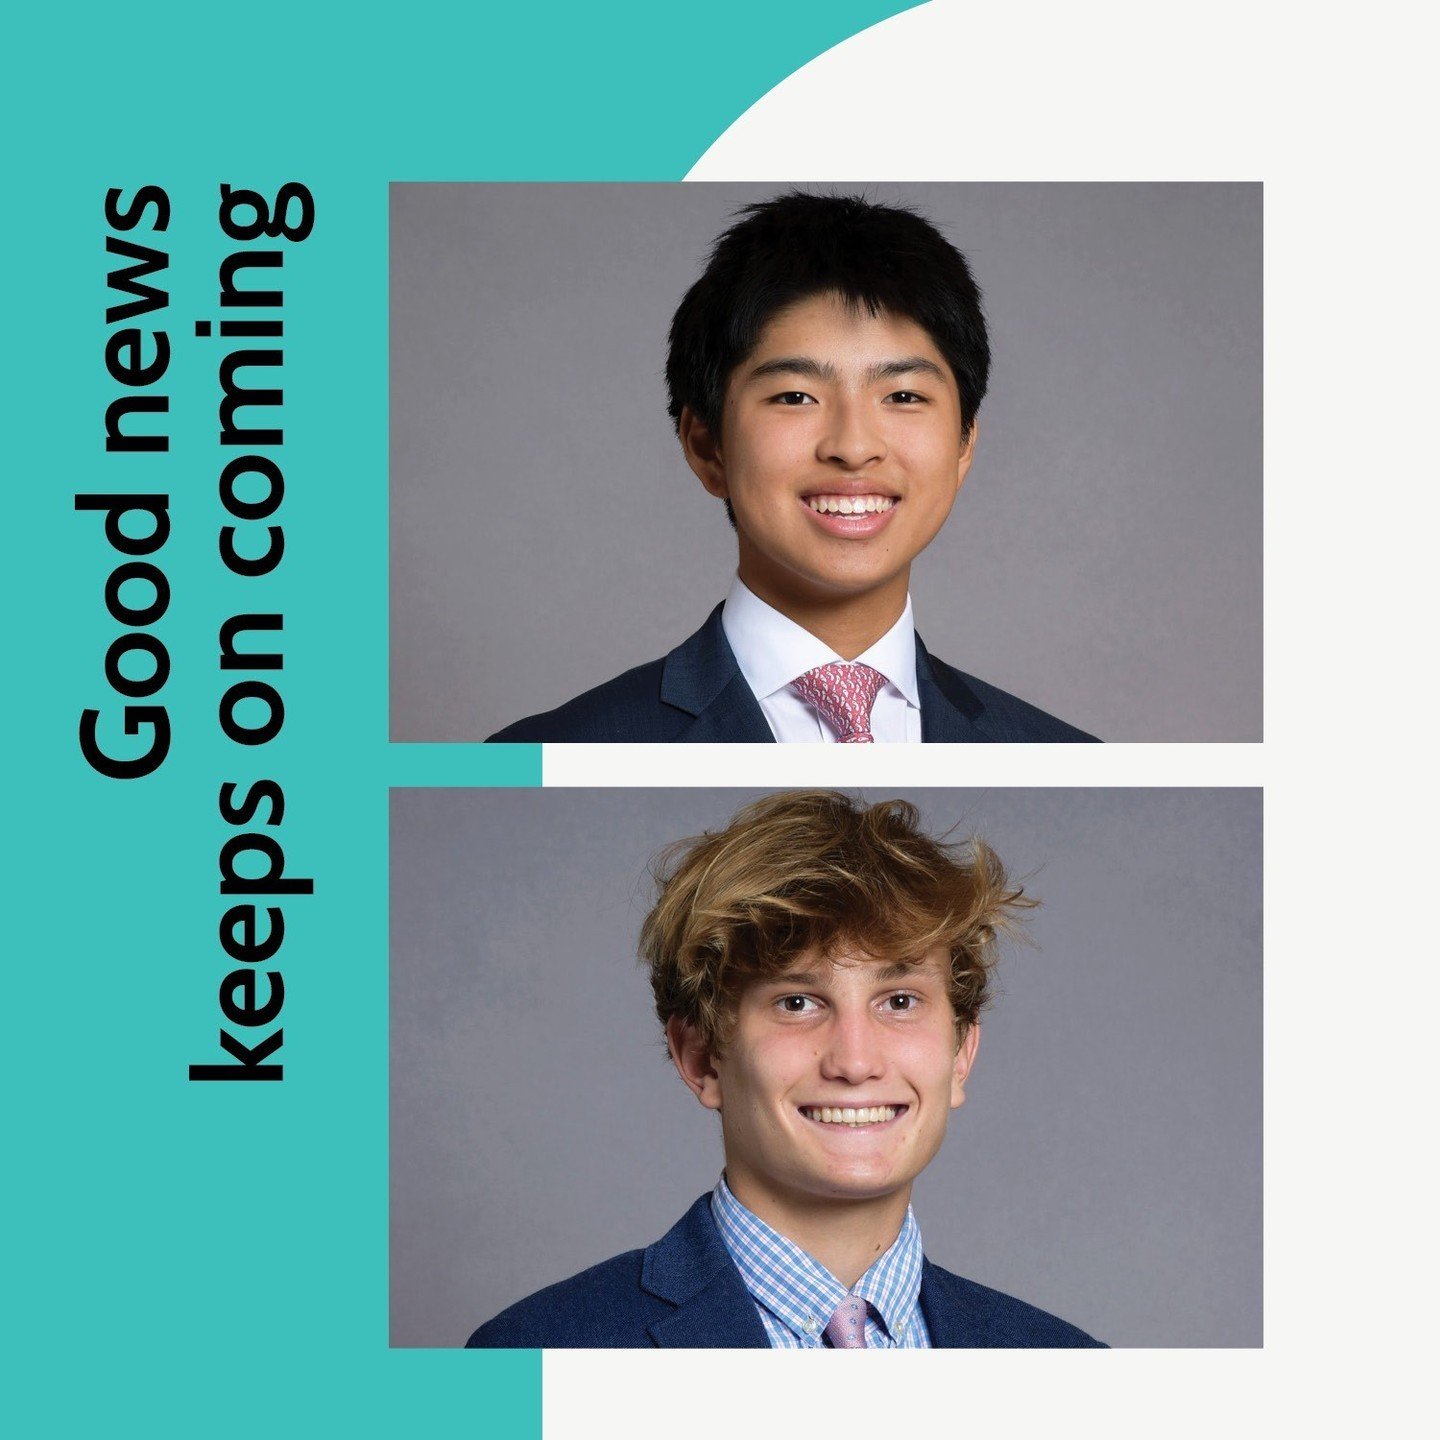 Join us in applauding Chase '25 and Colin '25 as our newly elected Student Council Co-Presidents for the 2024-2025 year!⁠
⁠
We couldn't be more excited about the remarkable leadership they'll provide and the inspiring positive changes they'll spark. 